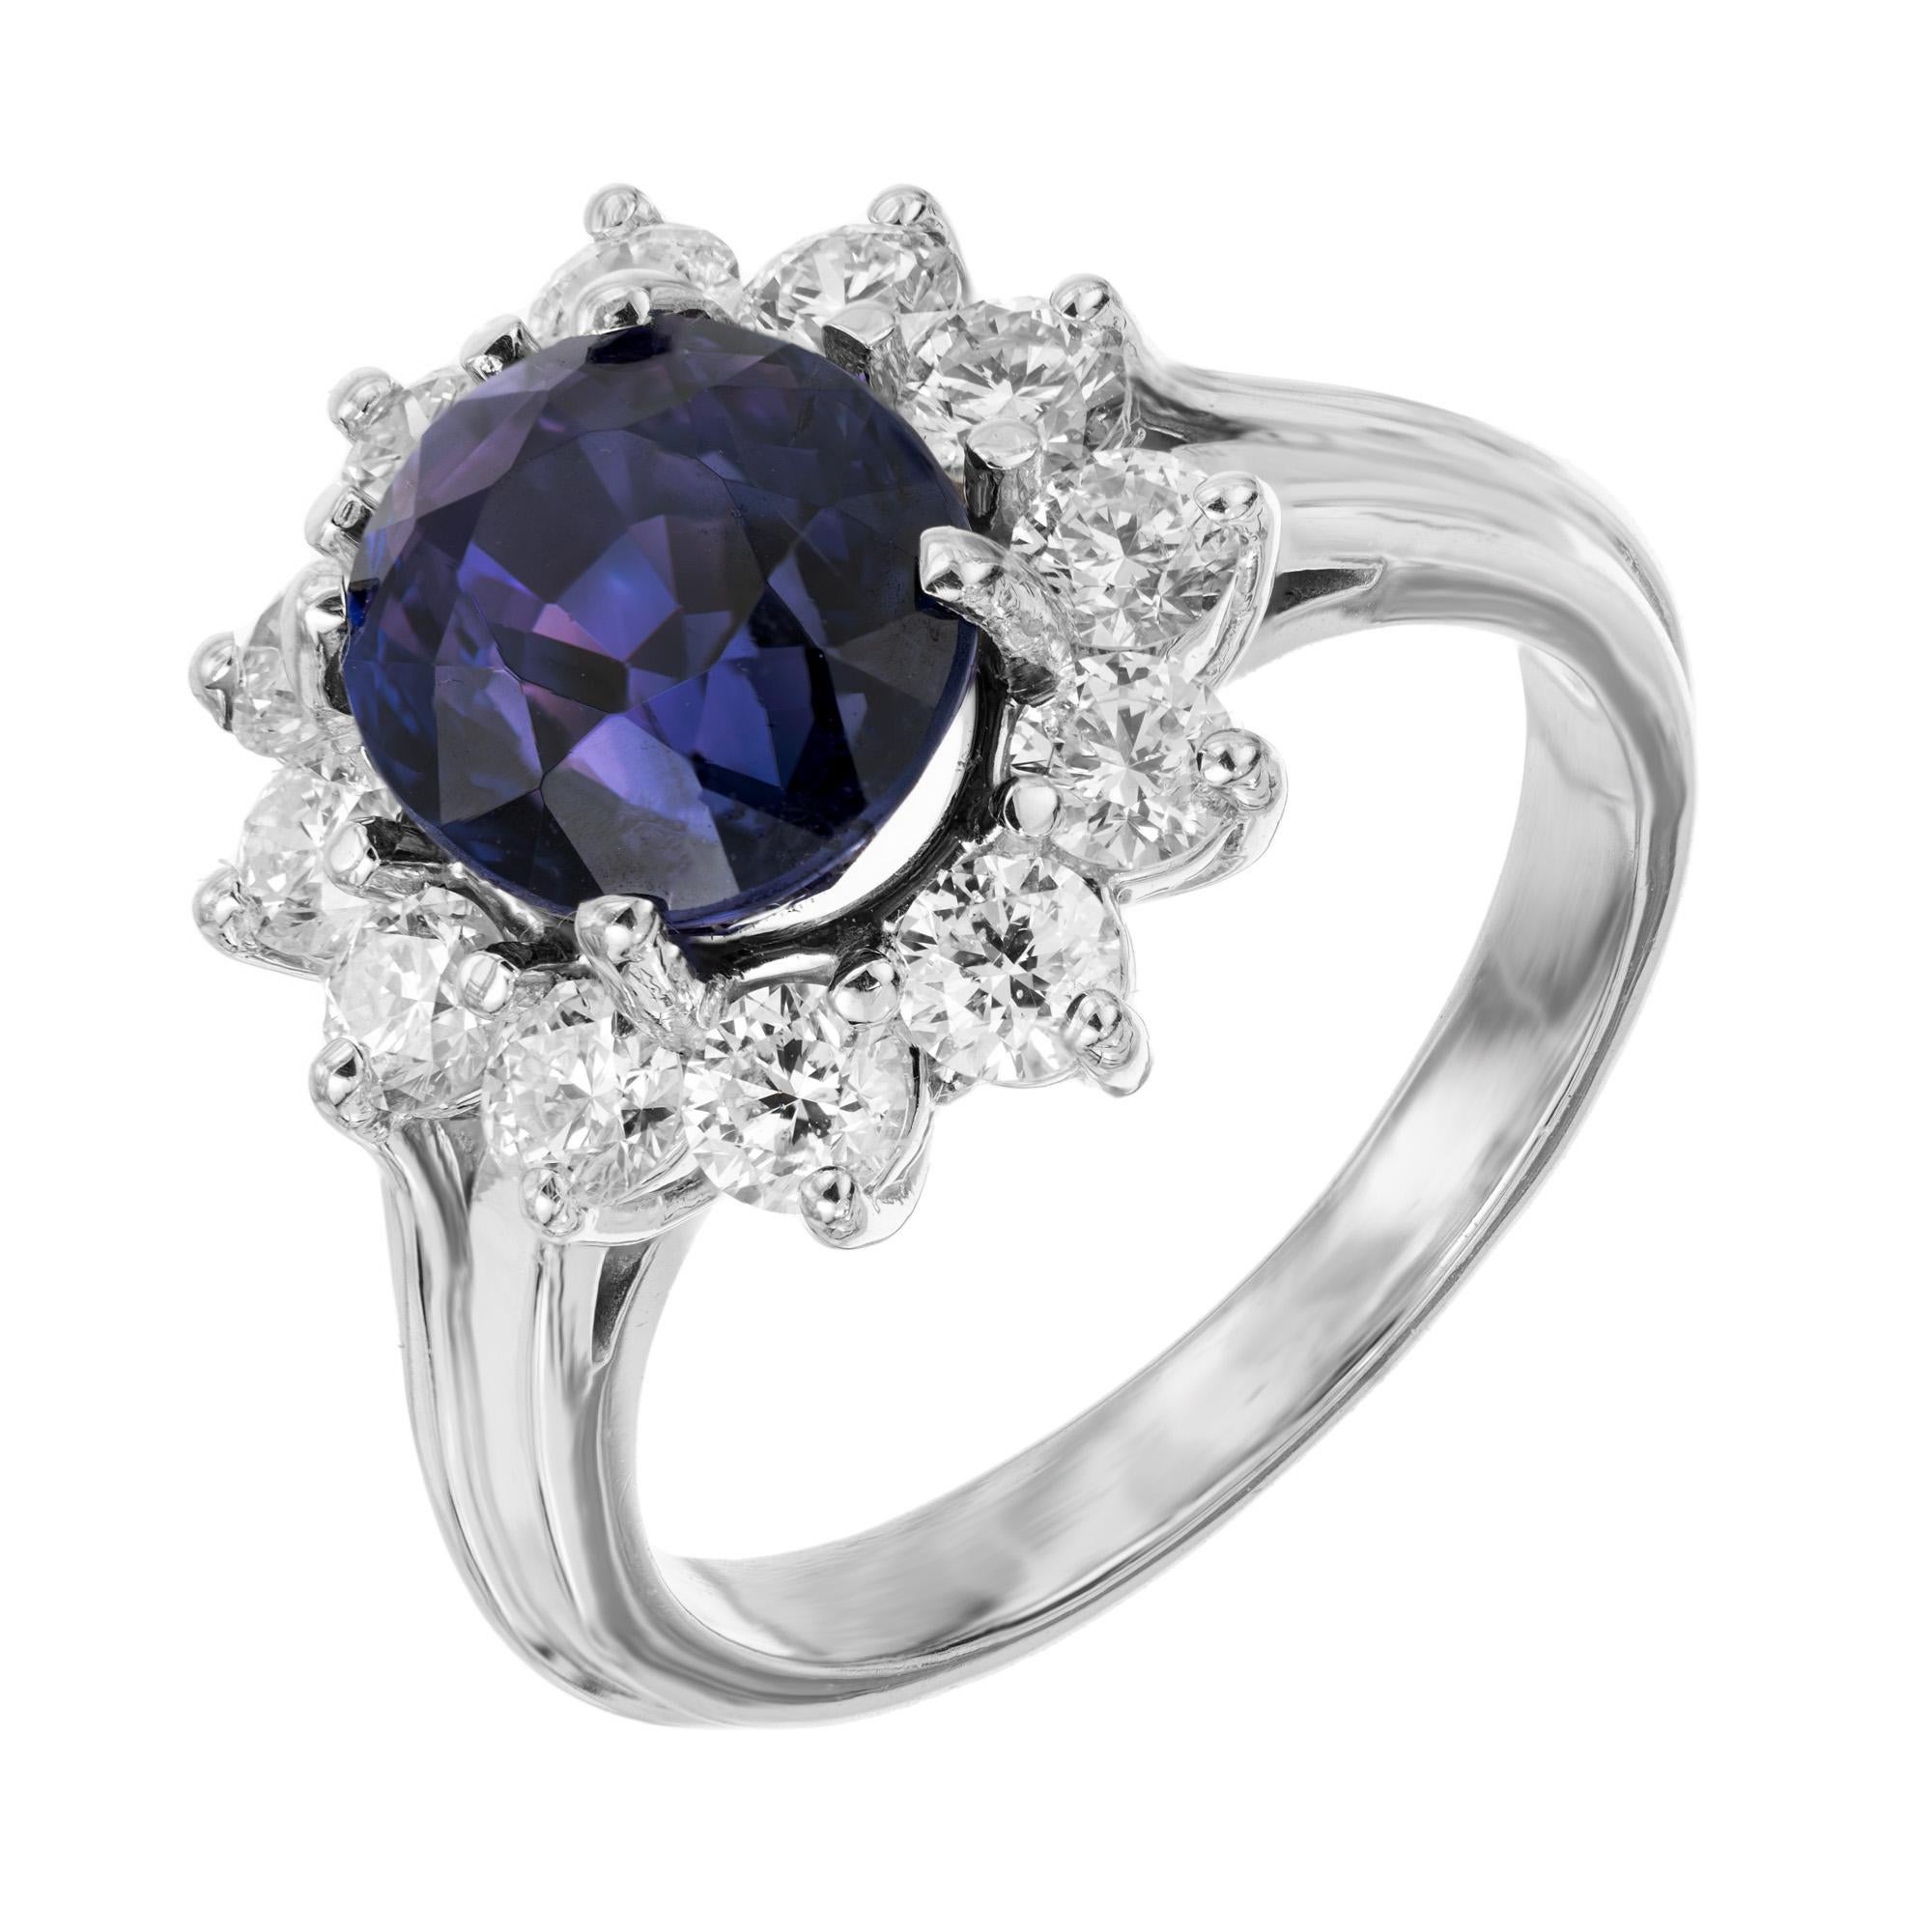 Vintage 1950's sapphire and diamond ring. Sensational 4.31ct oval center color change sapphire mounted in a handmade 14k white gold wire setting. A halo of 12 round ideal cut diamonds totaling 1.20cts complete this engagement ring. The diamonds have